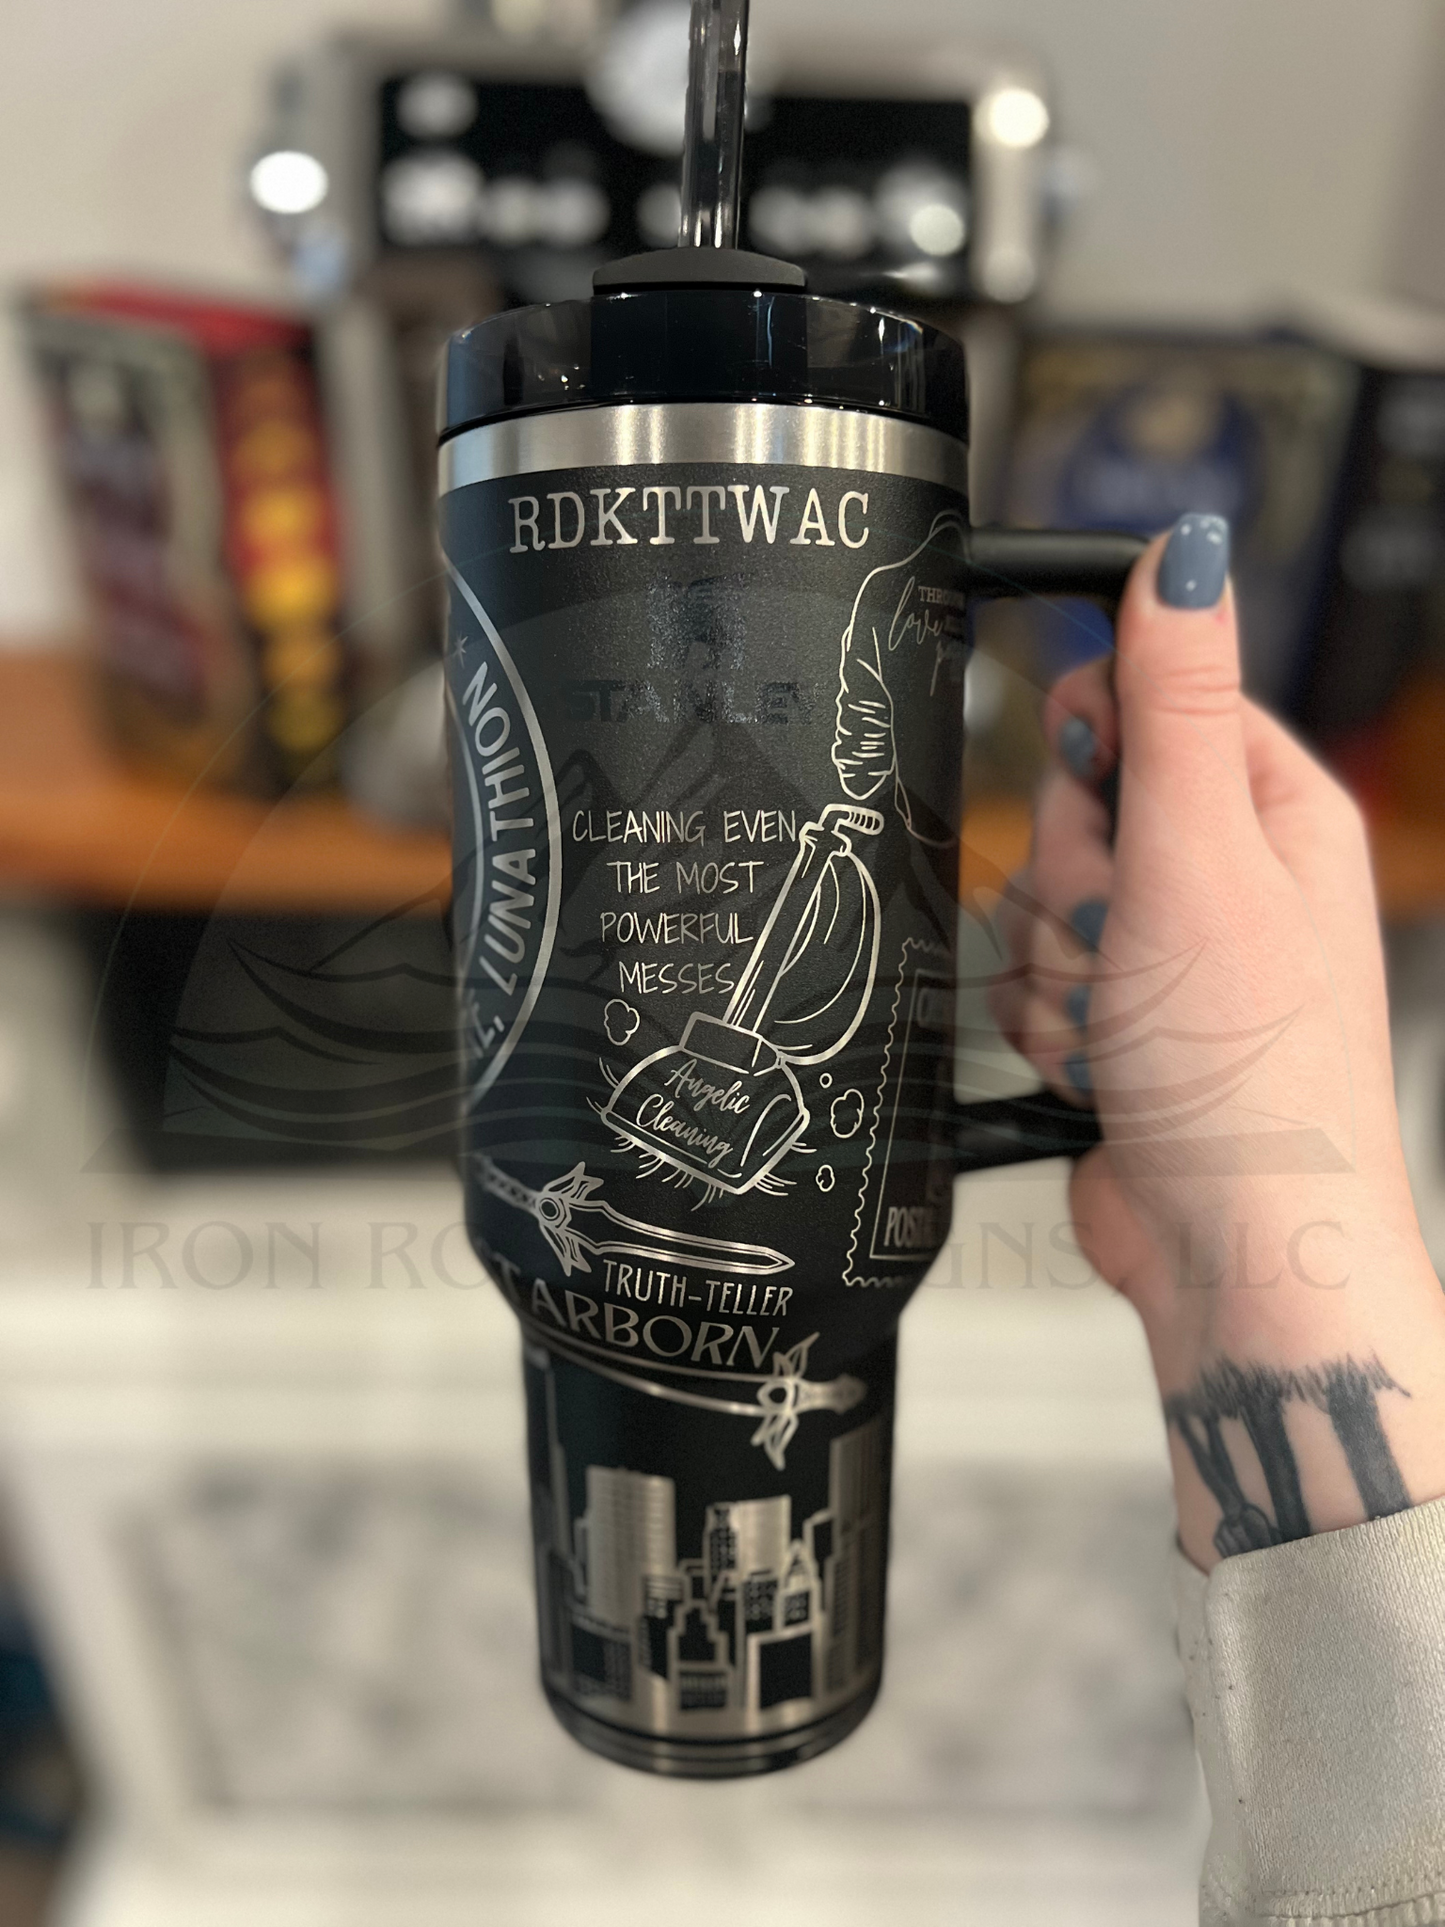 Crescent City Officially Licensed Tumbler